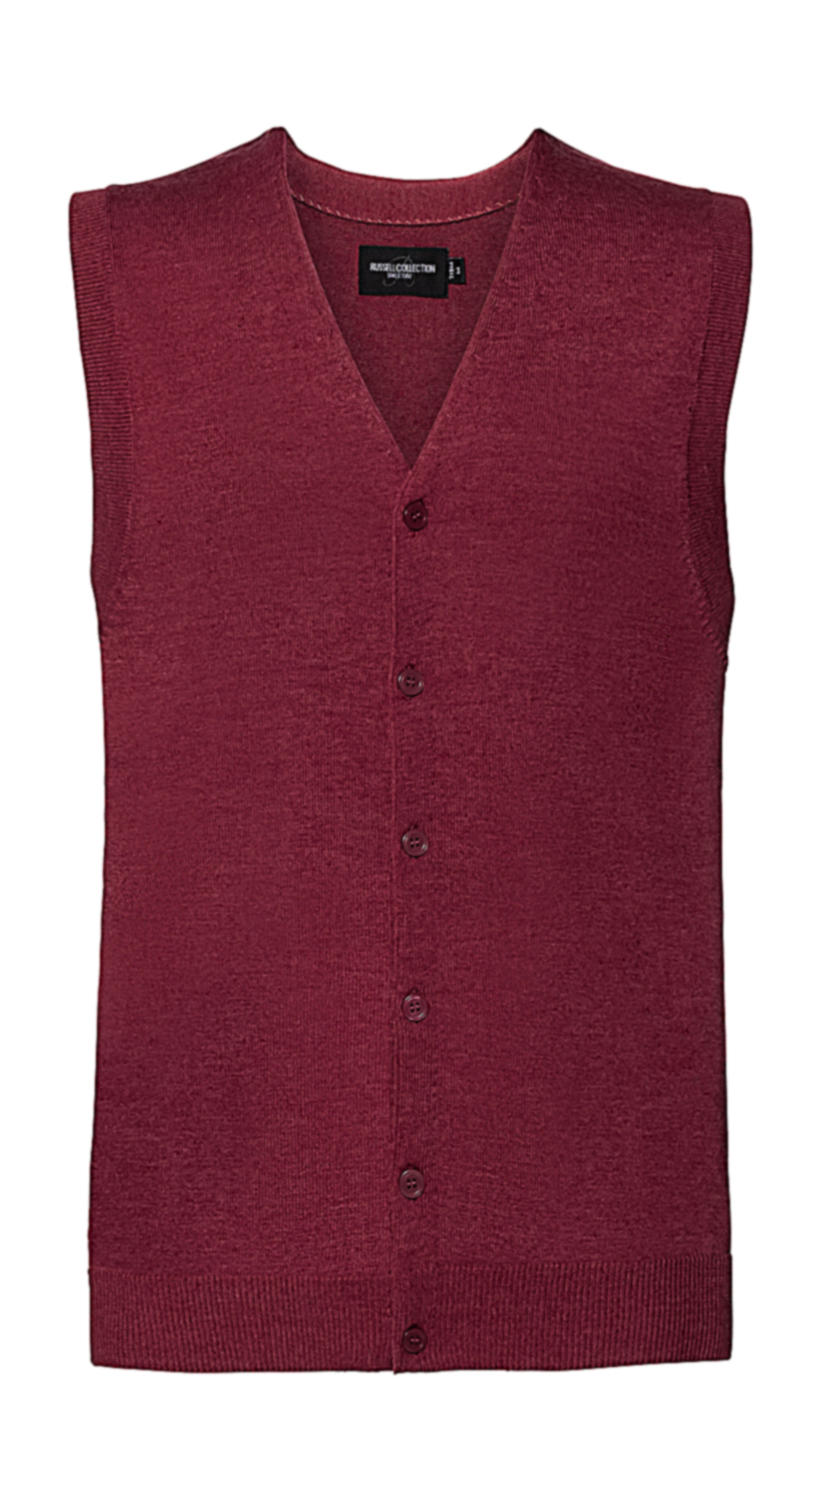  Mens V-Neck Sleeveless Knitted Cardigan in Farbe Cranberry Marl